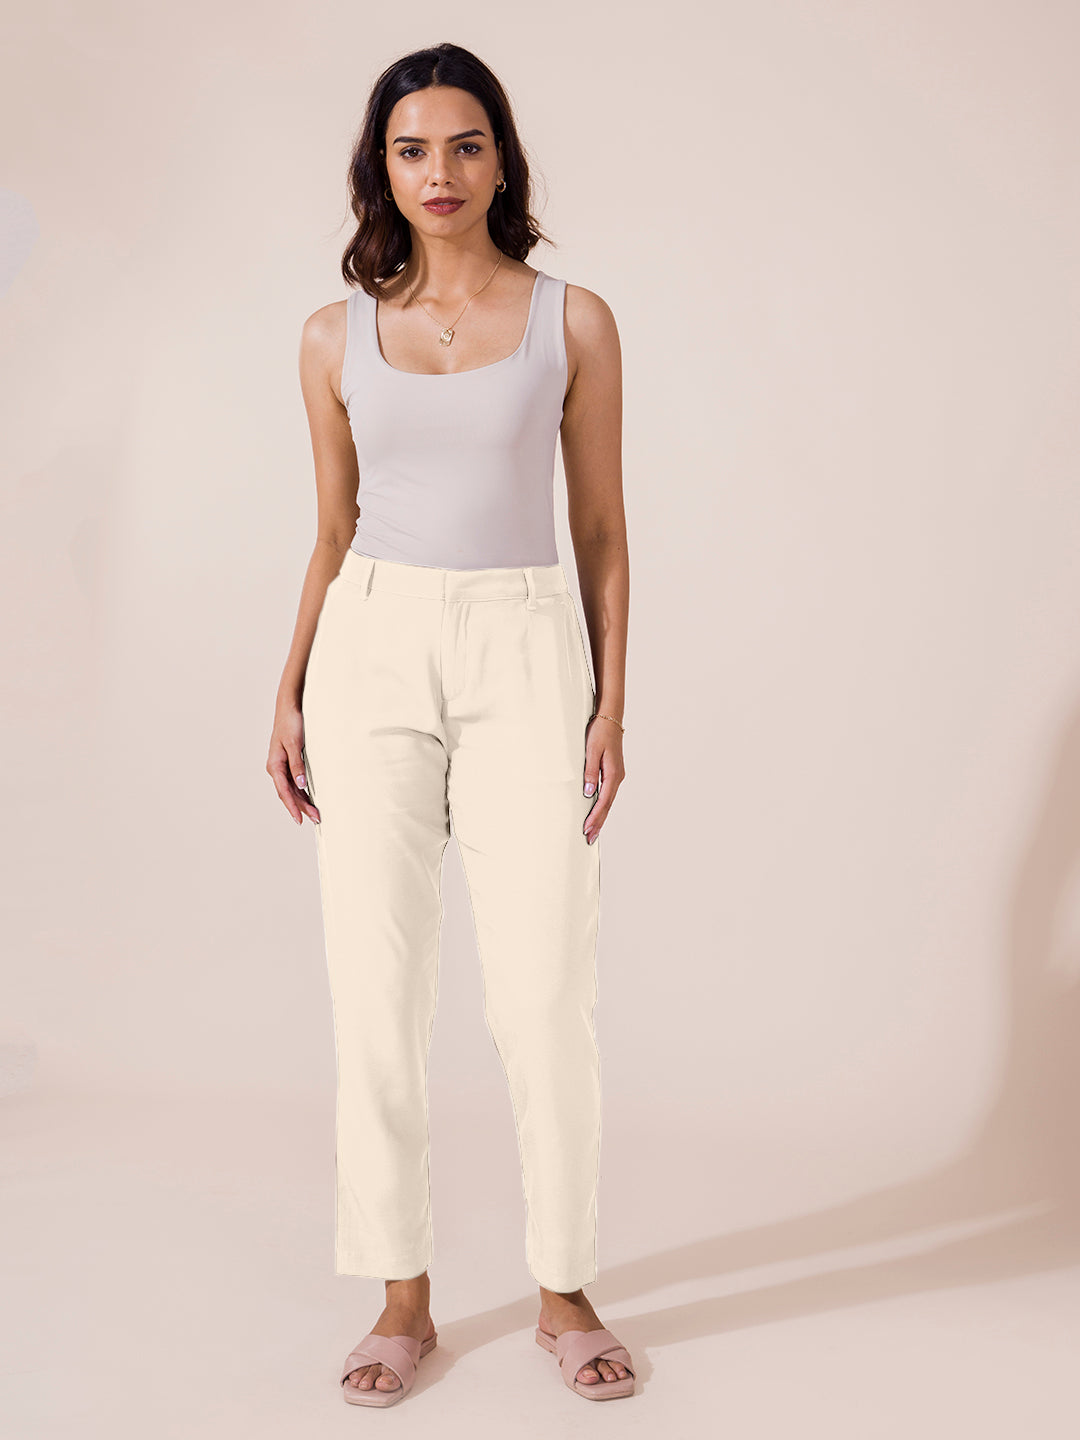 Cuffed textured crepe pant | Contemporaine | Shop Women%u2019s Skinny Pants  Online in Canada | Simons